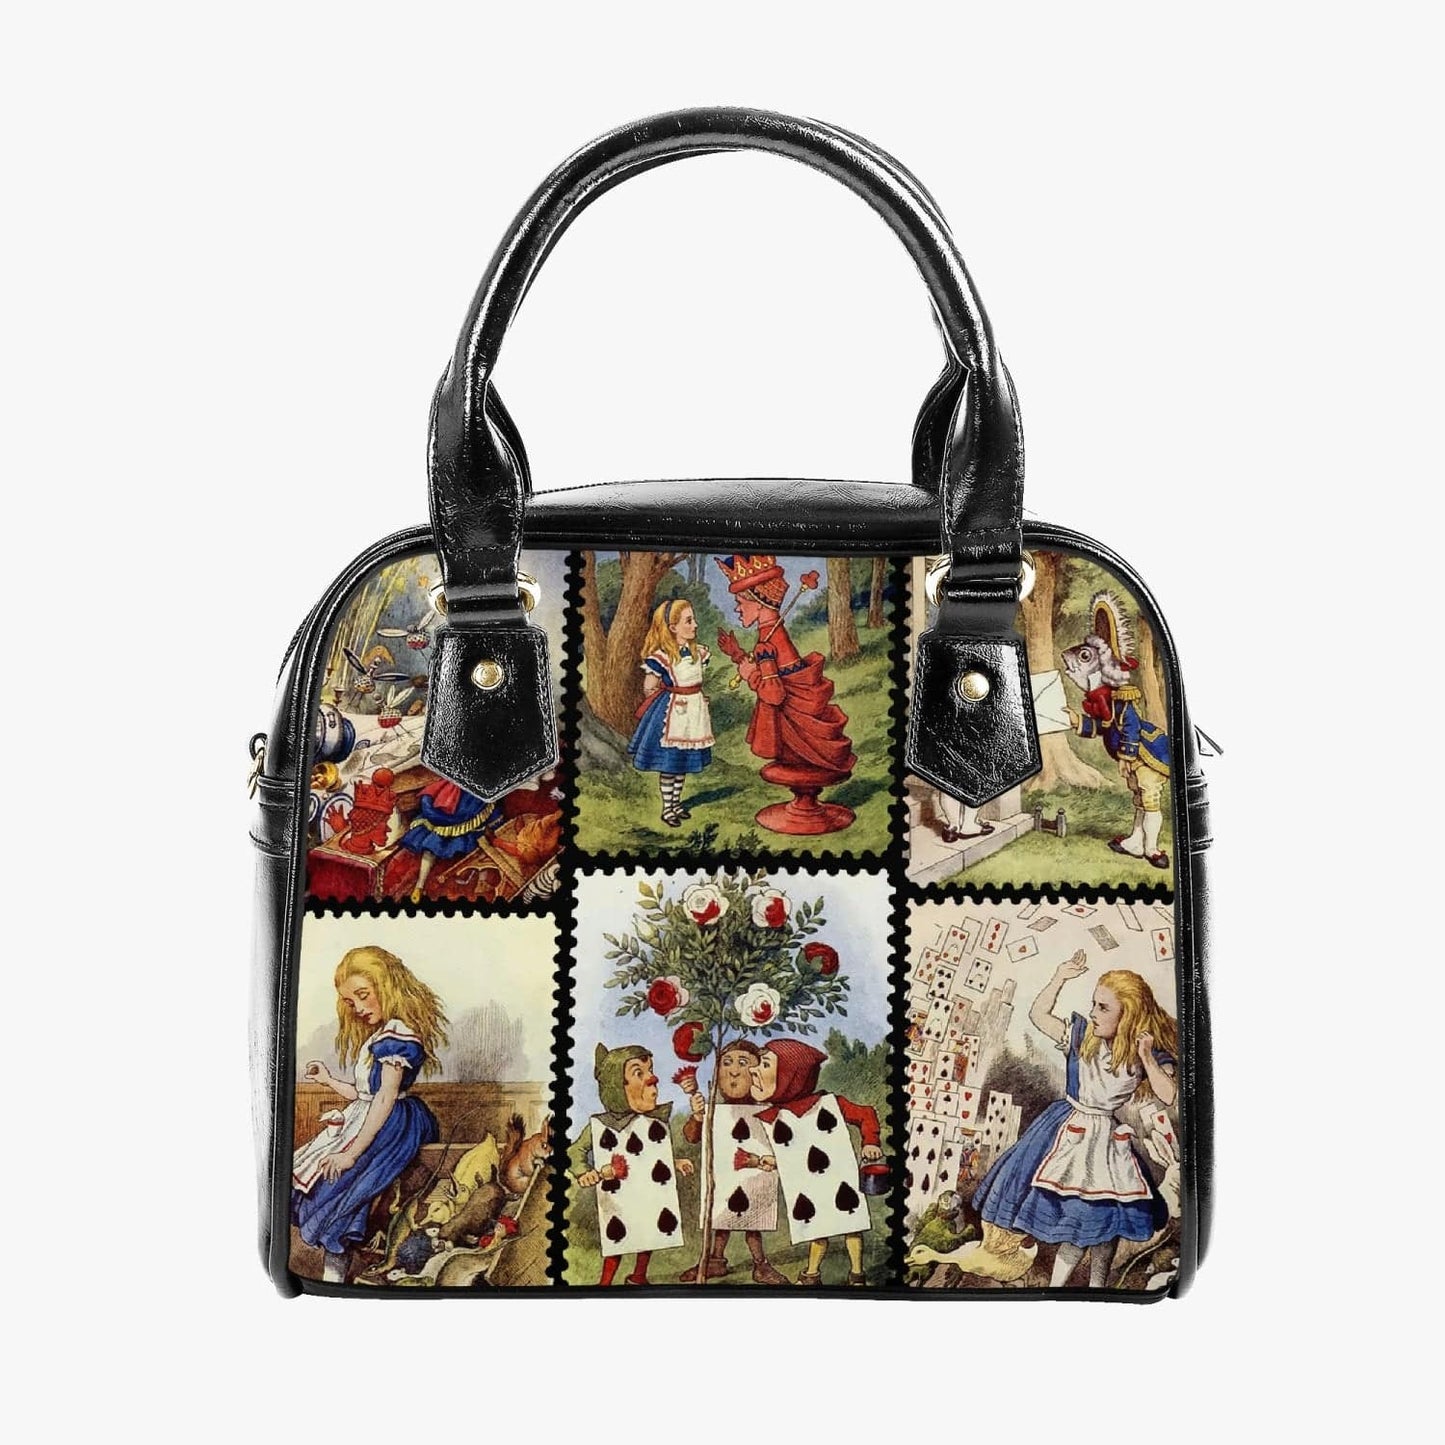 Twelve individual colourised vintage Alice in Wonderland images adorn this very cute and practical faux leather handbag at Gallery Serpentine 2